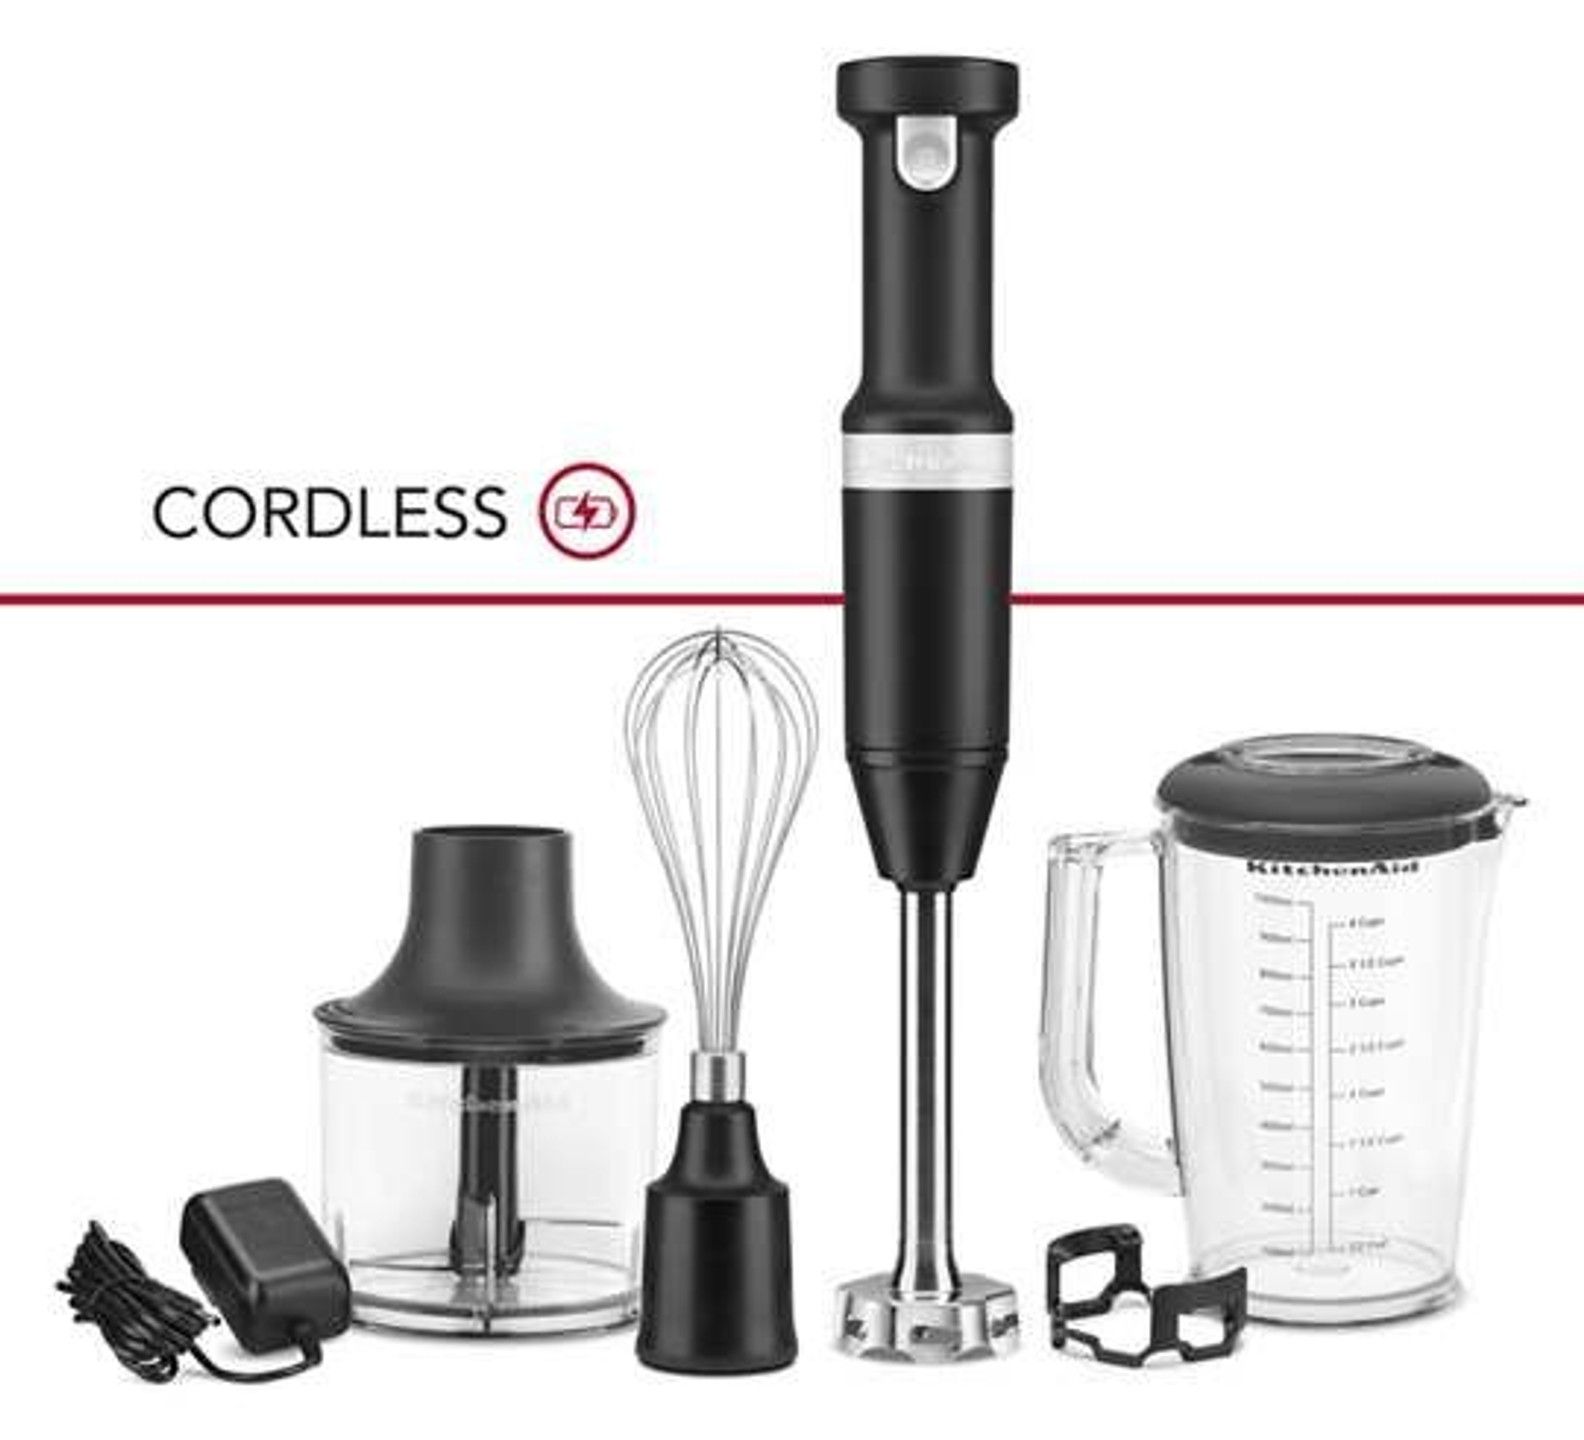 KitchenAid Cordless Variable Speed Hand Blender with Chopper